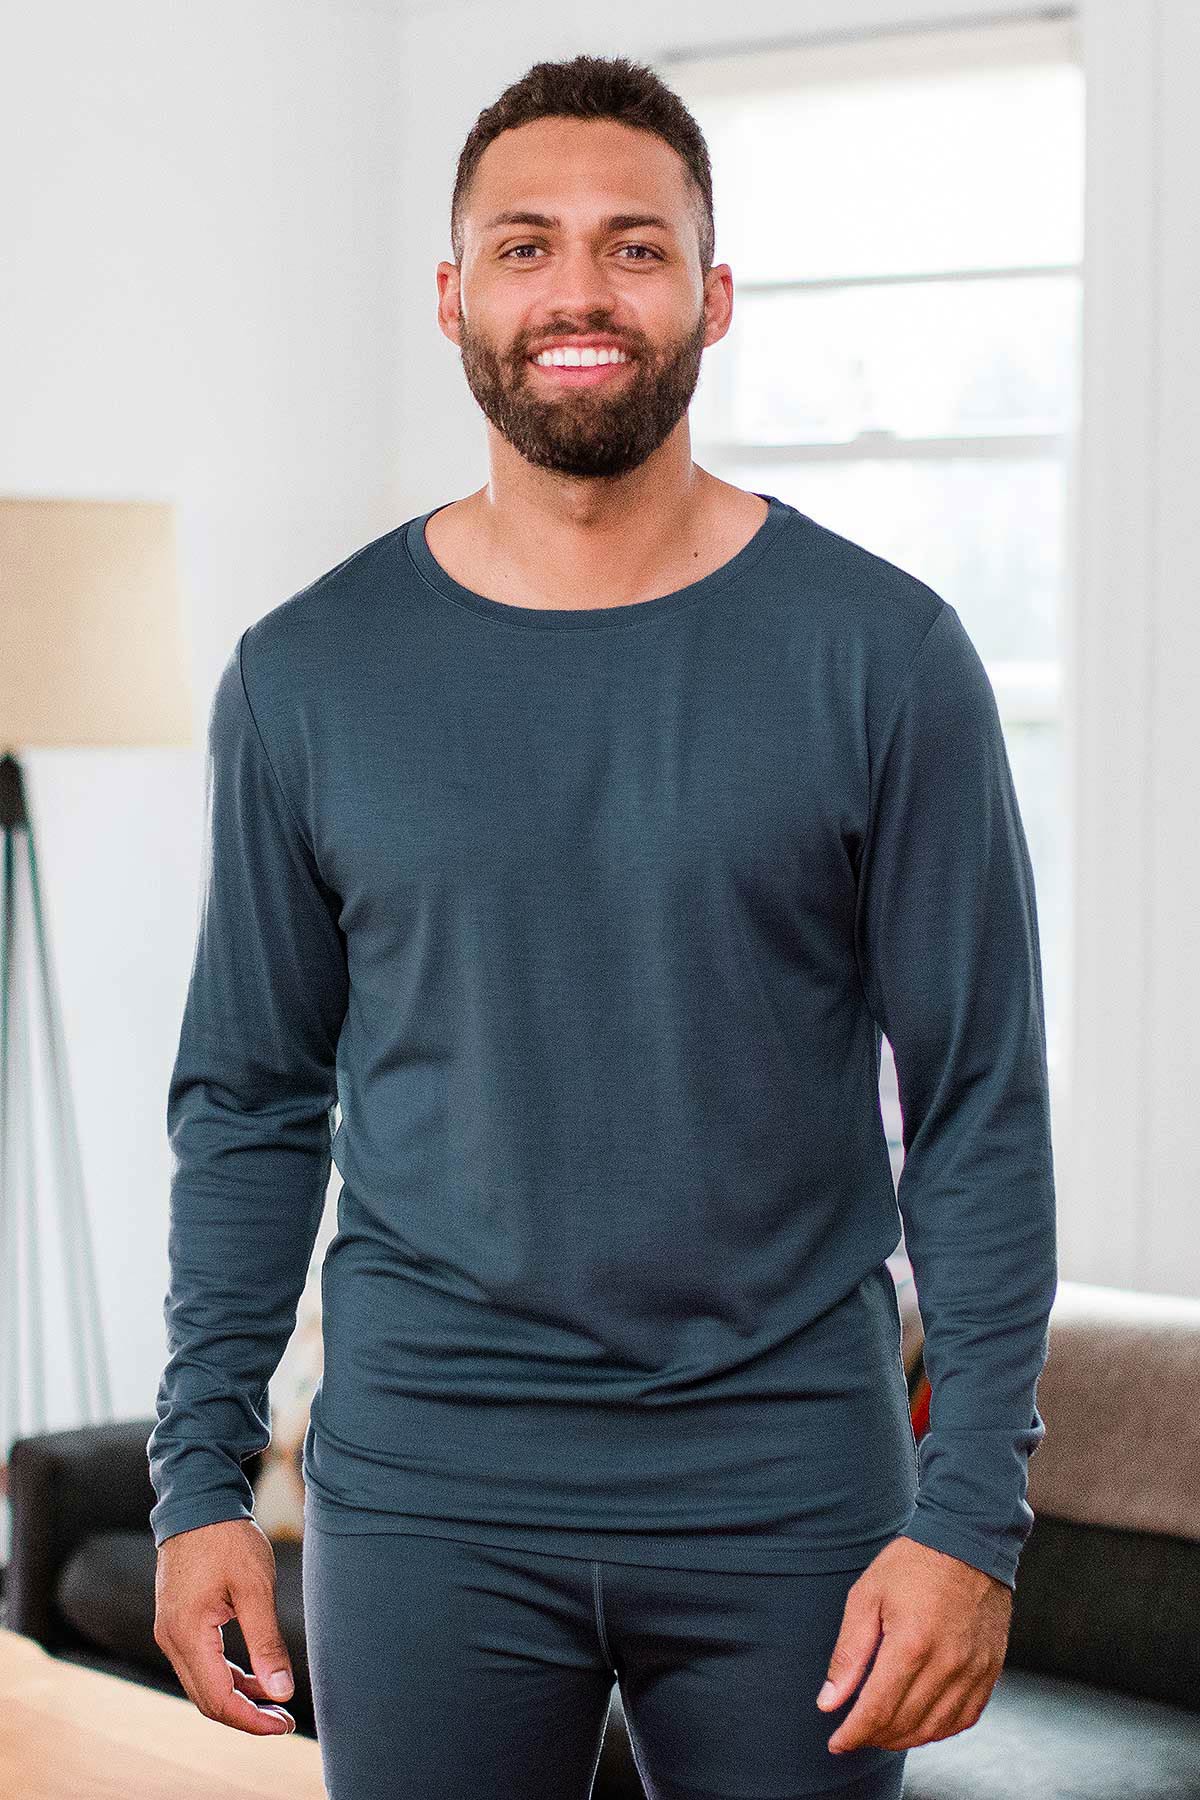 A man standing and smiling with both hands at his sides, wearing Yala Superfine Merino Wool Long Sleeve Top in Storm Grey